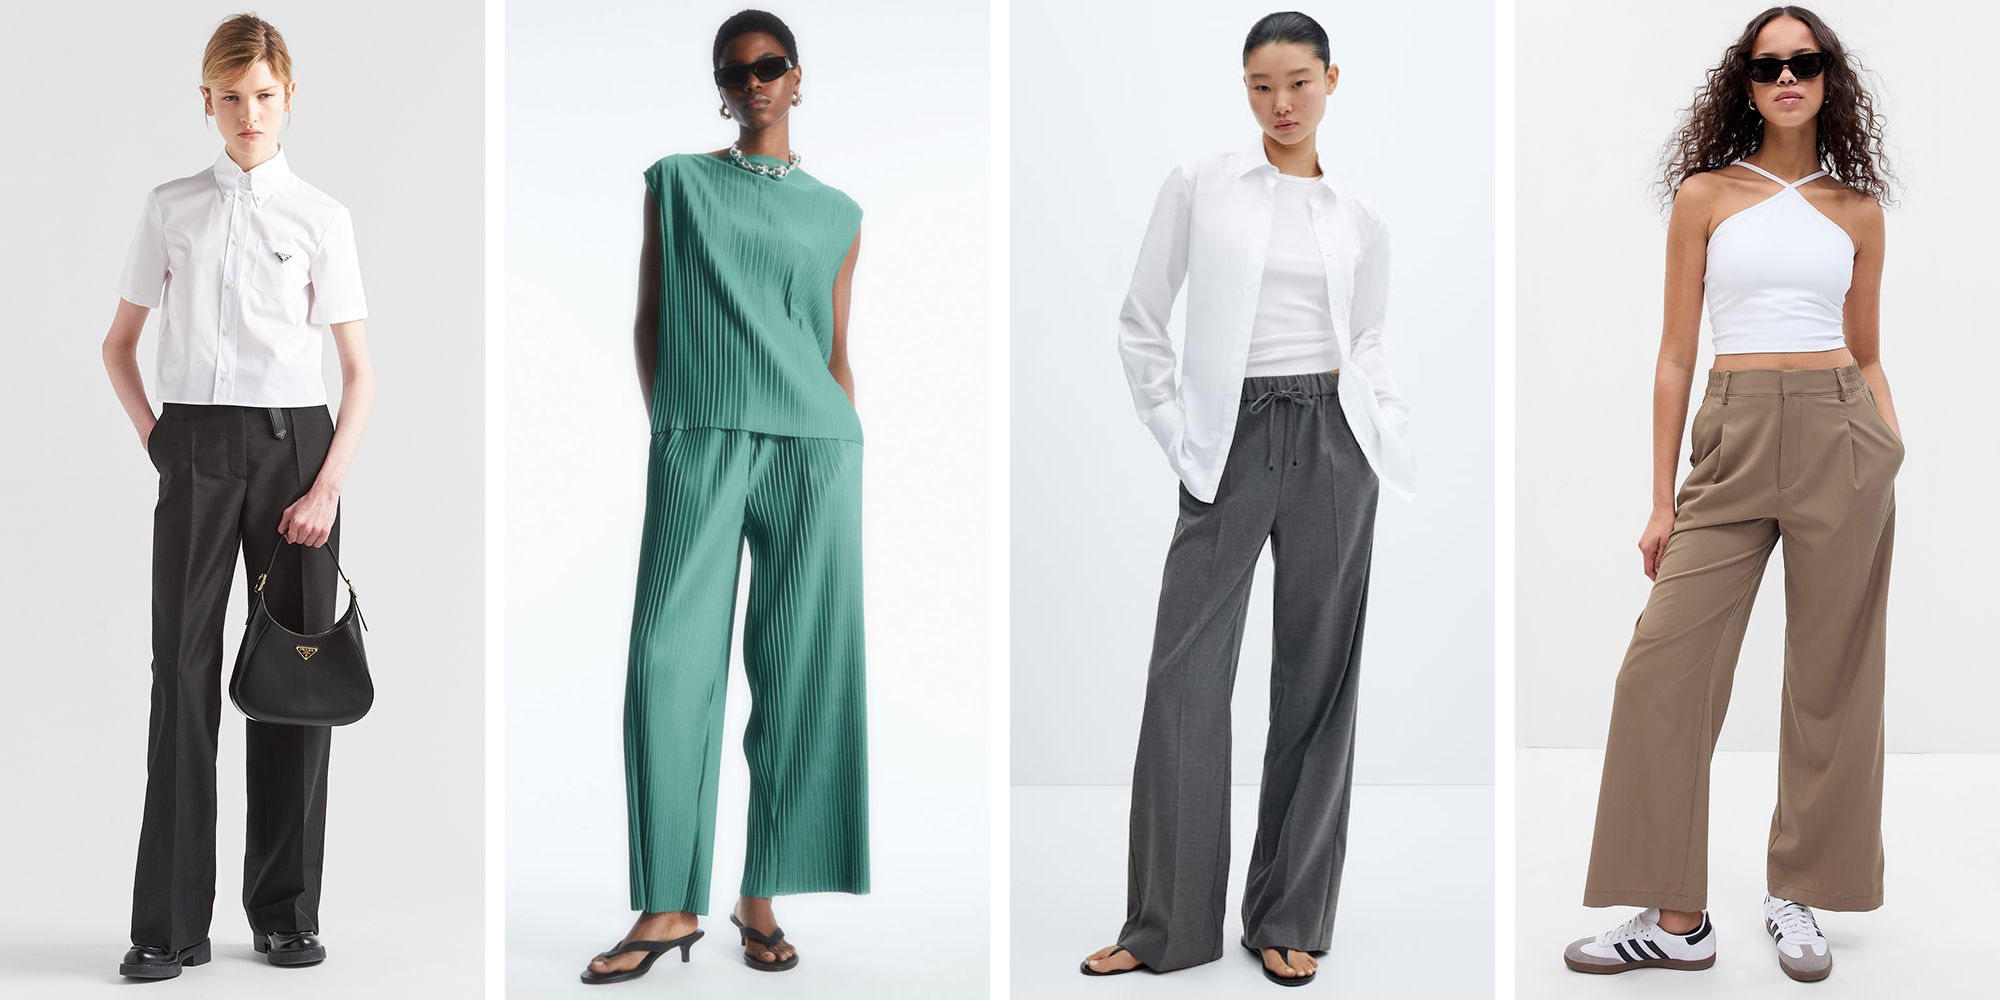 1 Top New Women Office Pants Loose Full Length - ADDMPS | Wide pants, Pants  for women, Fashion pants